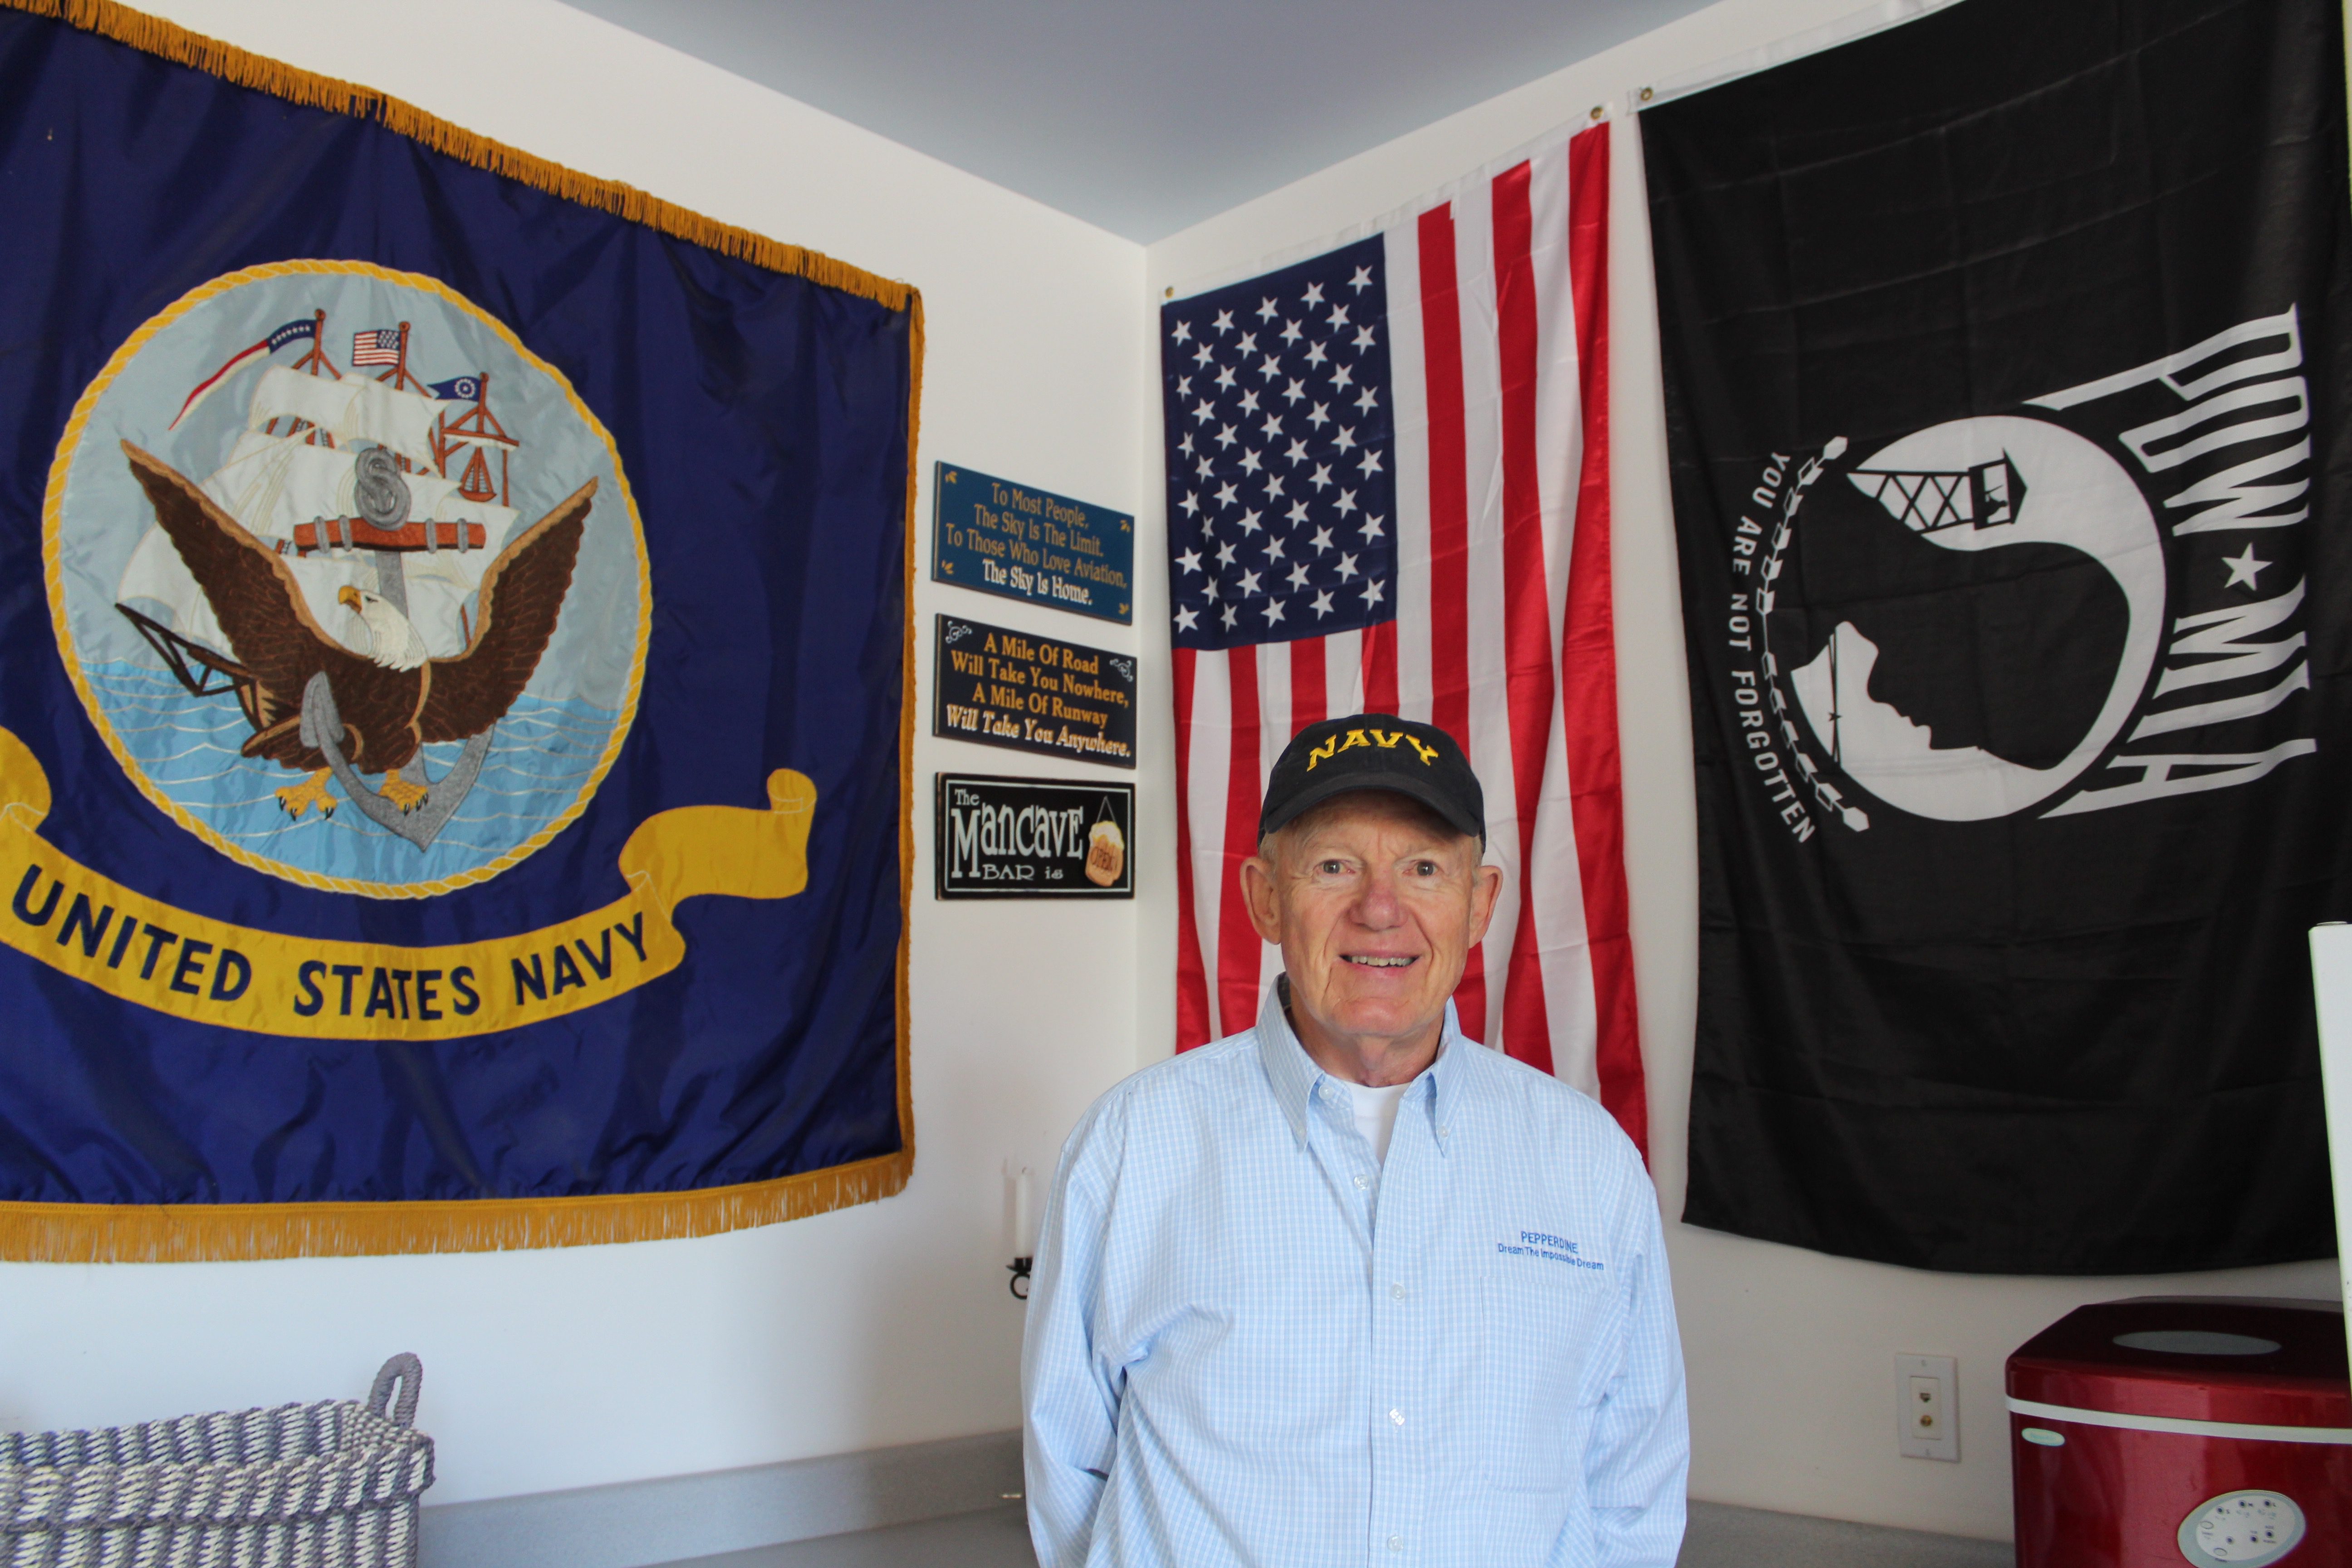 Vietnam POW wants other vets to find their next mission